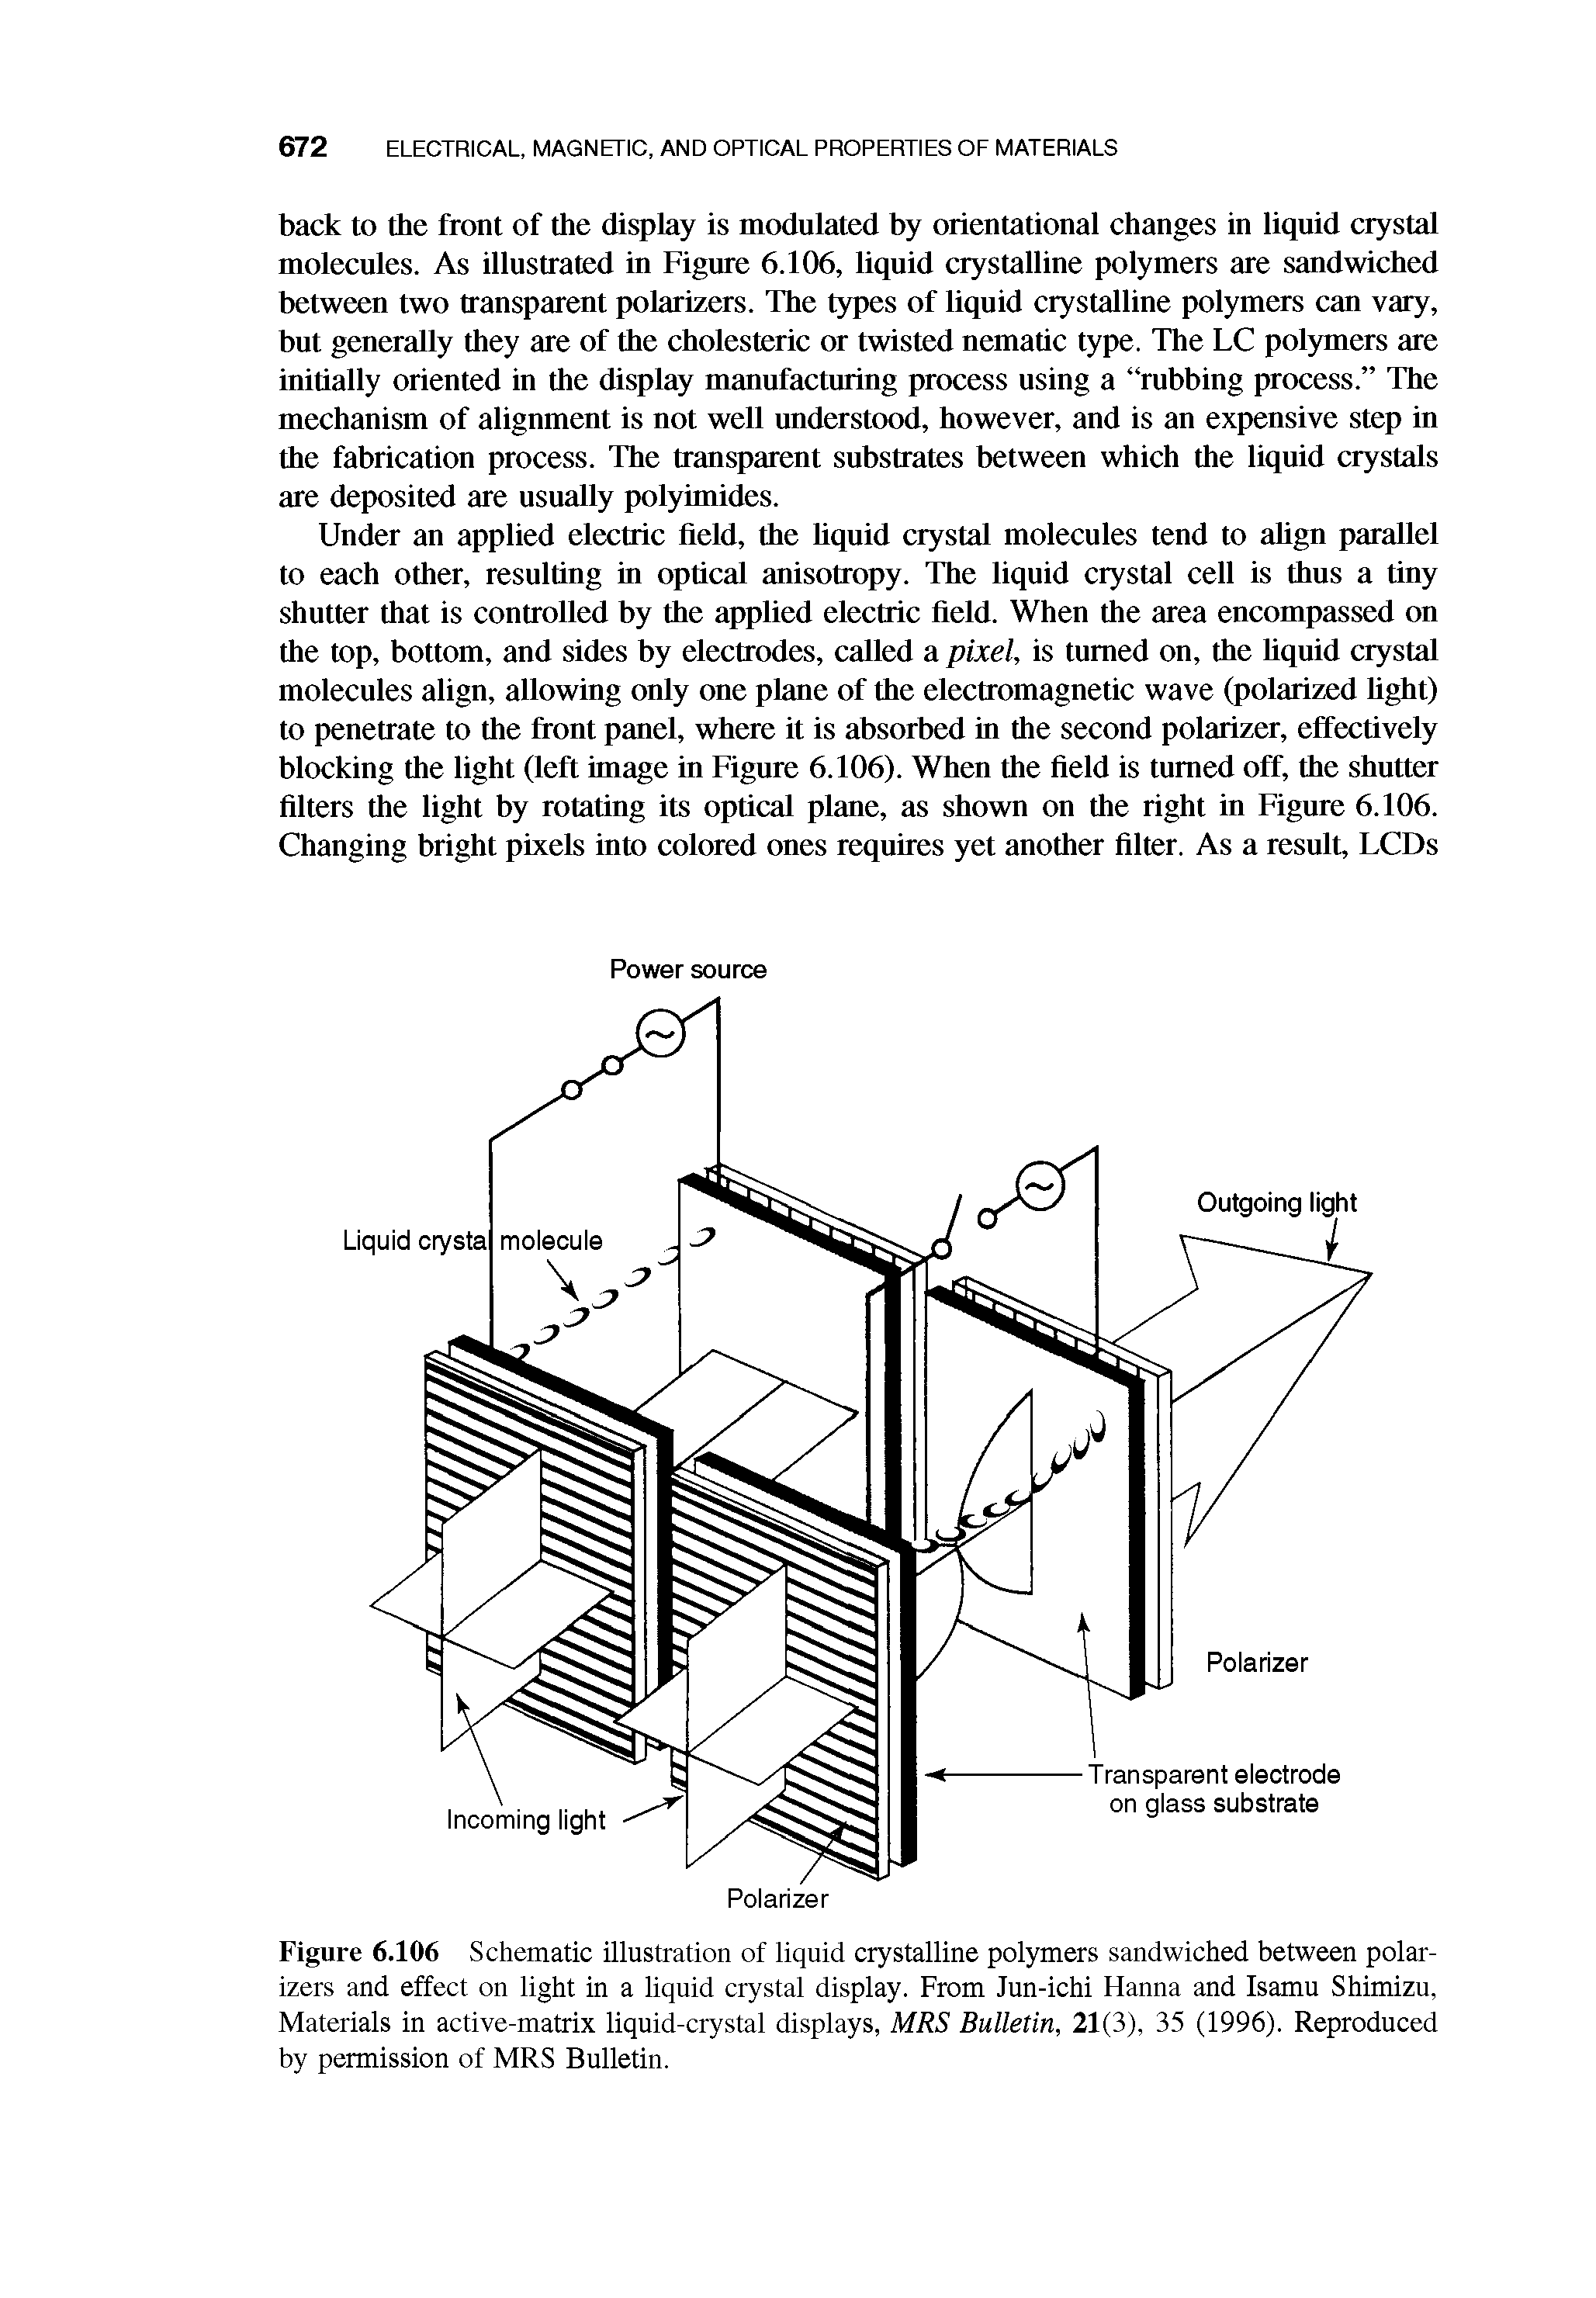 Figure 6.106 Schematic illustration of liquid crystalline polymers sandwiched between polarizers and effect on light in a liquid crystal display. From Jun-ichi Hanna and Isamu Shimizu, Materials in active-matrix liquid-crystal displays, MRS Bulletin, 21(3), 35 (1996). Reproduced by permission of MRS Bulletin.